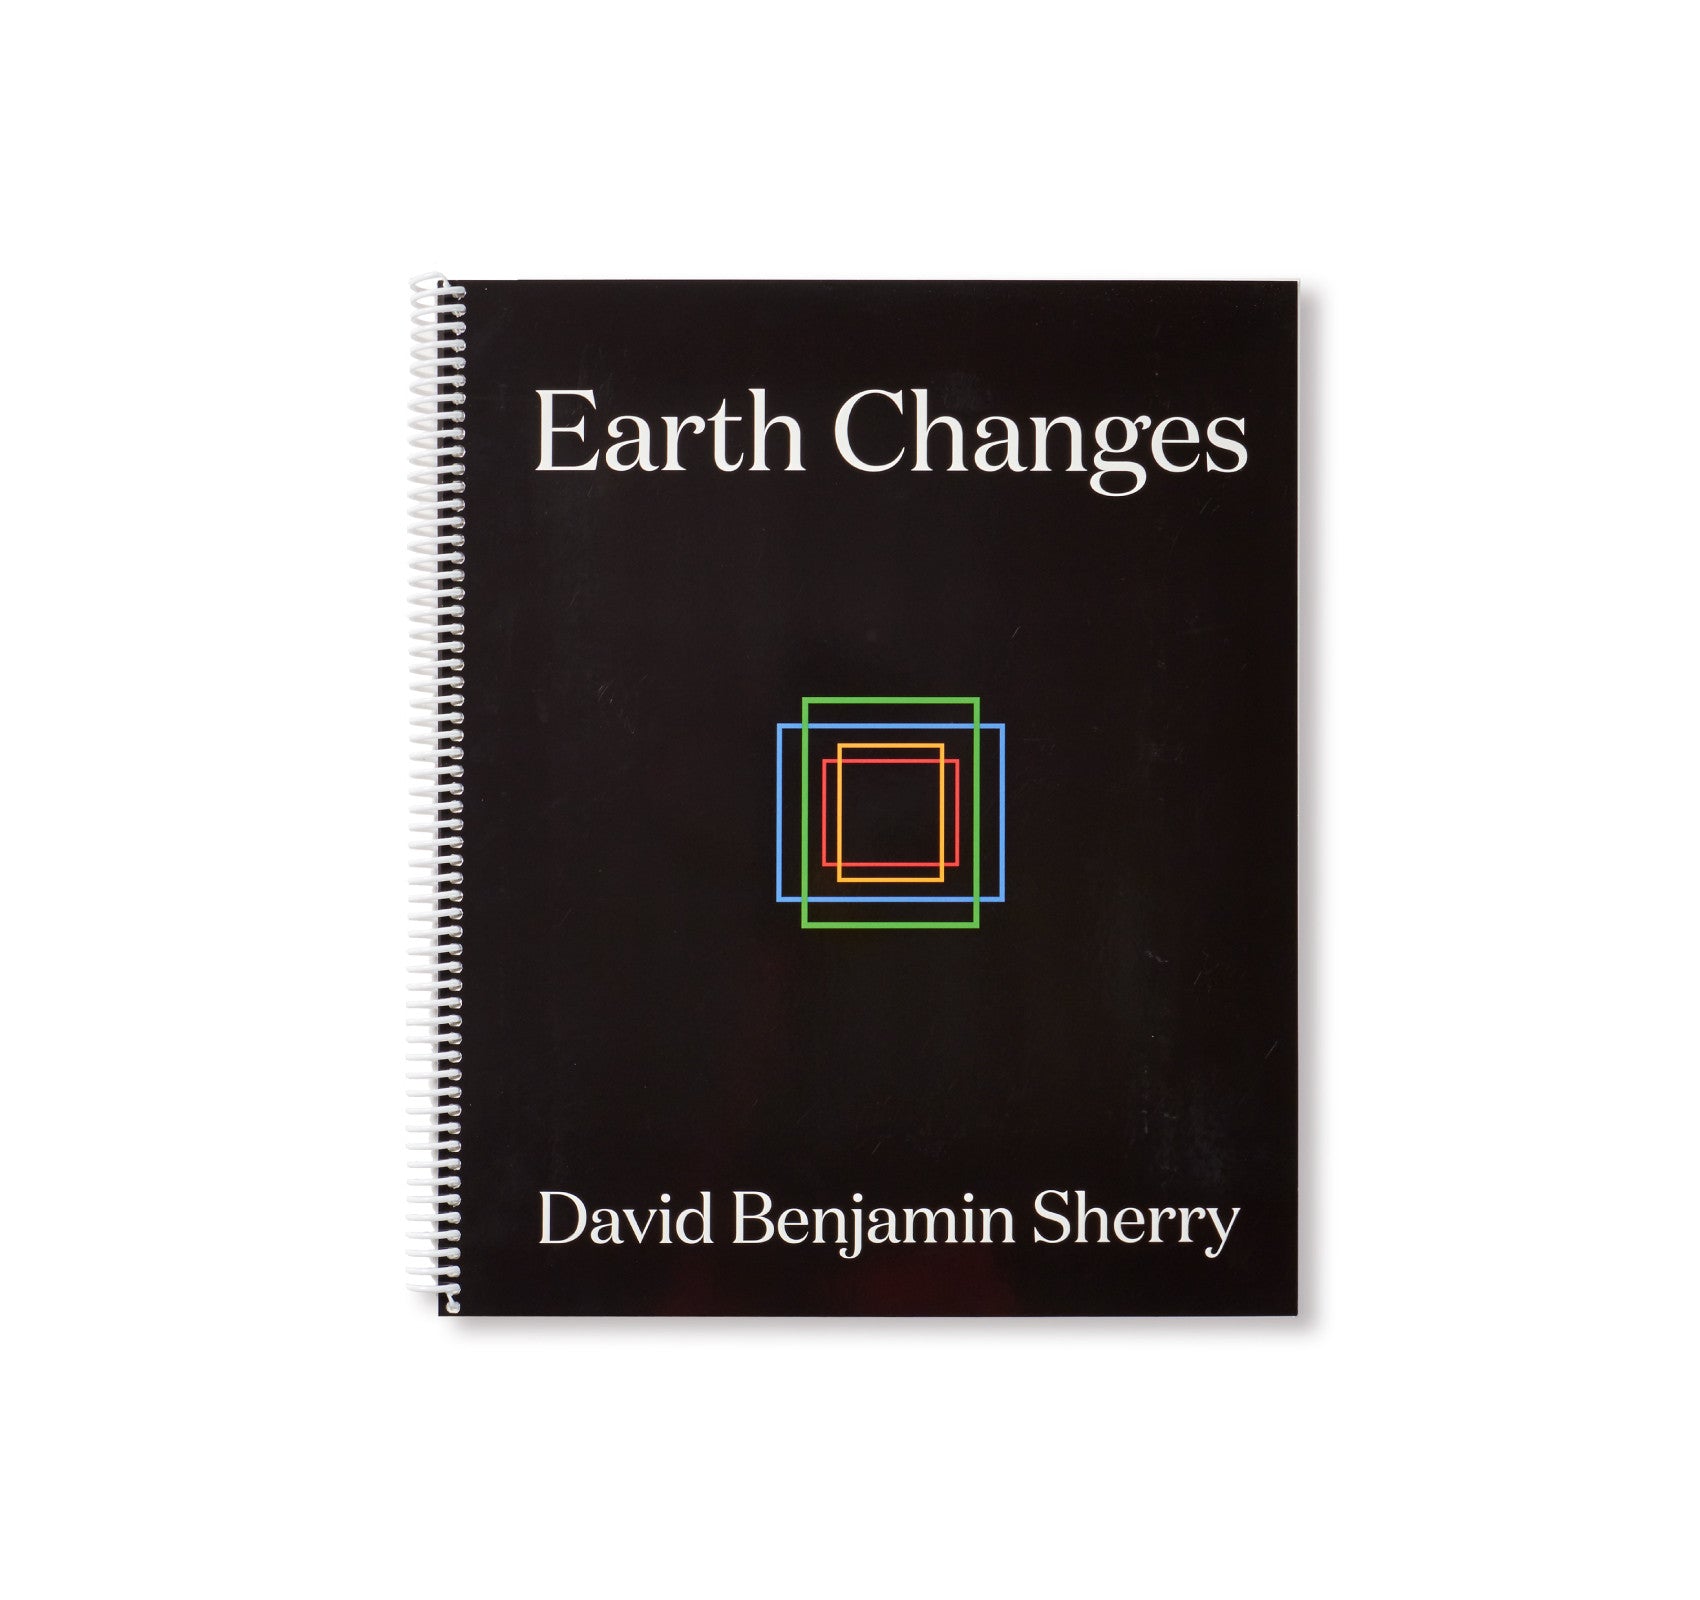 EARTH CHANGES by David Benjamin Sherry